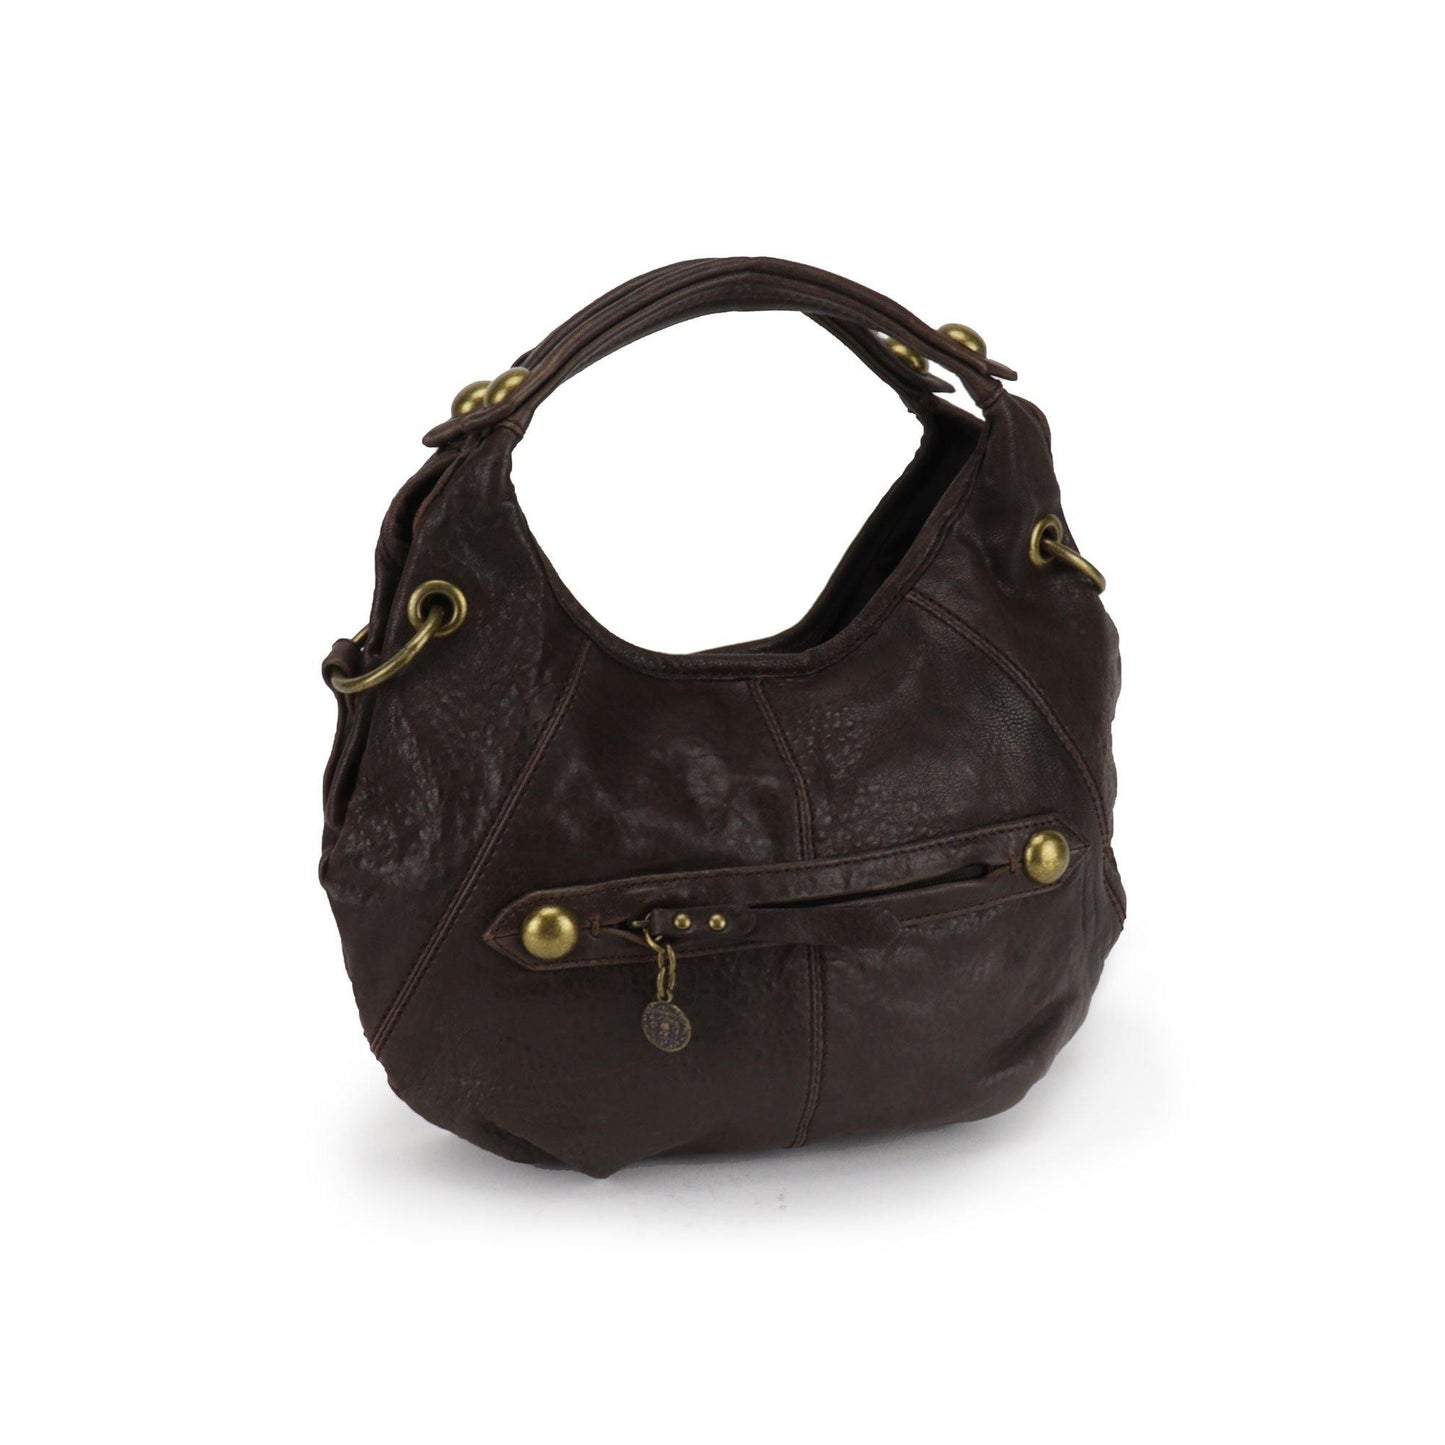 SOUTH HOUS EXCLUSIVE Bernardo Charlize Leather Handbag in a small version hobo style lambskin vintage brass